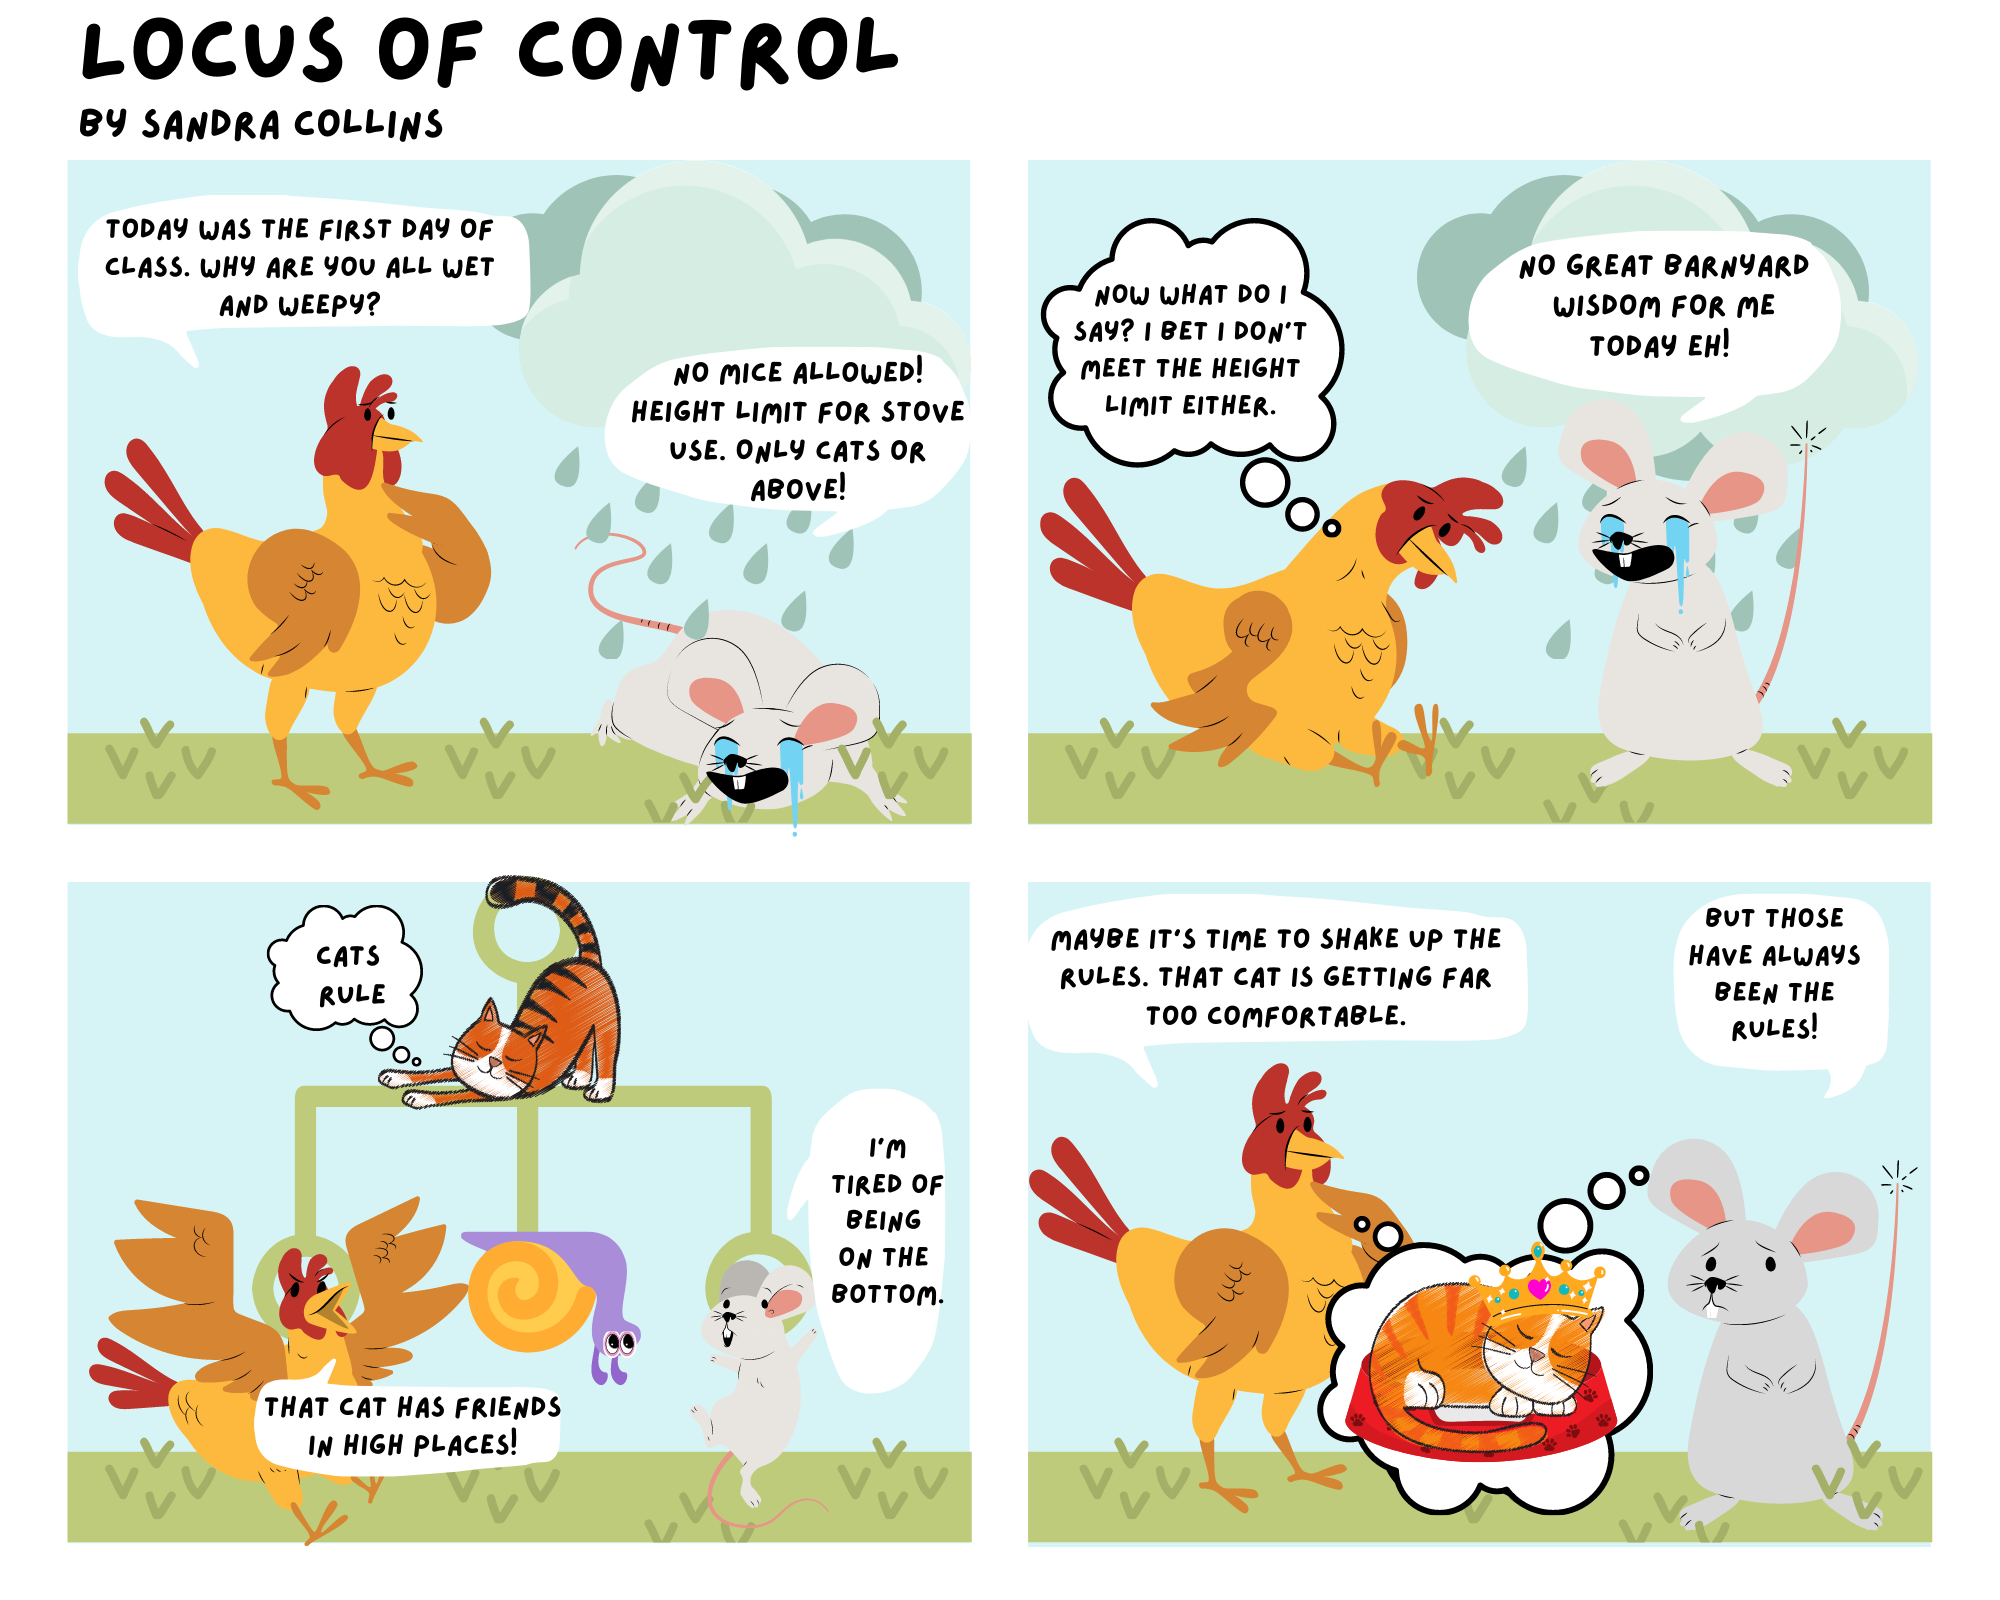 In this comic, rooster walks up to mouse who is crying and lying under a rain cloud. Rooster queries “Today was the first day of class. Why are you all wet and weepy?” to which mouse replies “No mice allowed! Height restriction for stove use. Only cats or above!” Rooster slumps down and thinks to itself “Now what do I say? I bet I don’t meet the height limit either.” Mouse says “No great barnyard wisdom for today eh!” In the next scene the image of a hierarchy appears behind the animals. Rooster and mouse are hanging from their assigned spots and snail has joined them on the lower places in the hierarchy. Can stretches leisurely above and thinks “Cats rule!” Rooster exclaims “That cat has friends in high places” to which mouse replies “I’m tired of being on the bottom.” In the final scene, rooster and cat are both picturing cat asleep in its bed with a crown on its head. Rooster states “Maybe it is time to shake up the rules. That cat is getting far too comfortable. Mouse looks worried and replies “But those have always been the rules.”